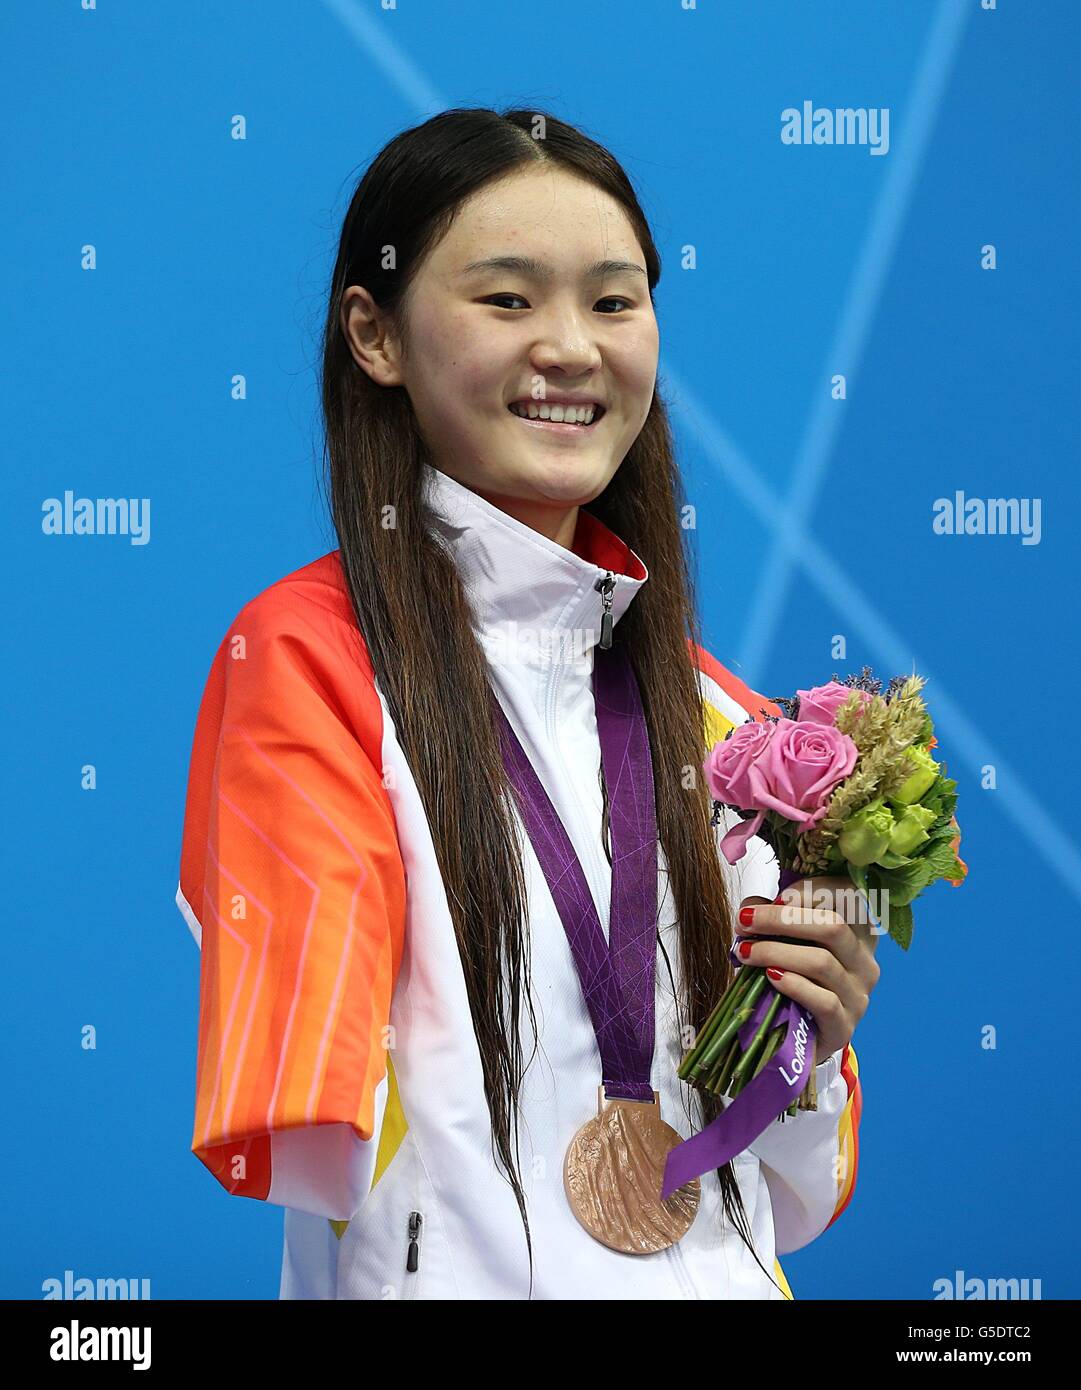 London Paralympic Games - Day 7. Bronze Medalist China's Shengnan Jiang with her Medal after the Women's 200m Ind. Medley - SM8 Final Stock Photo